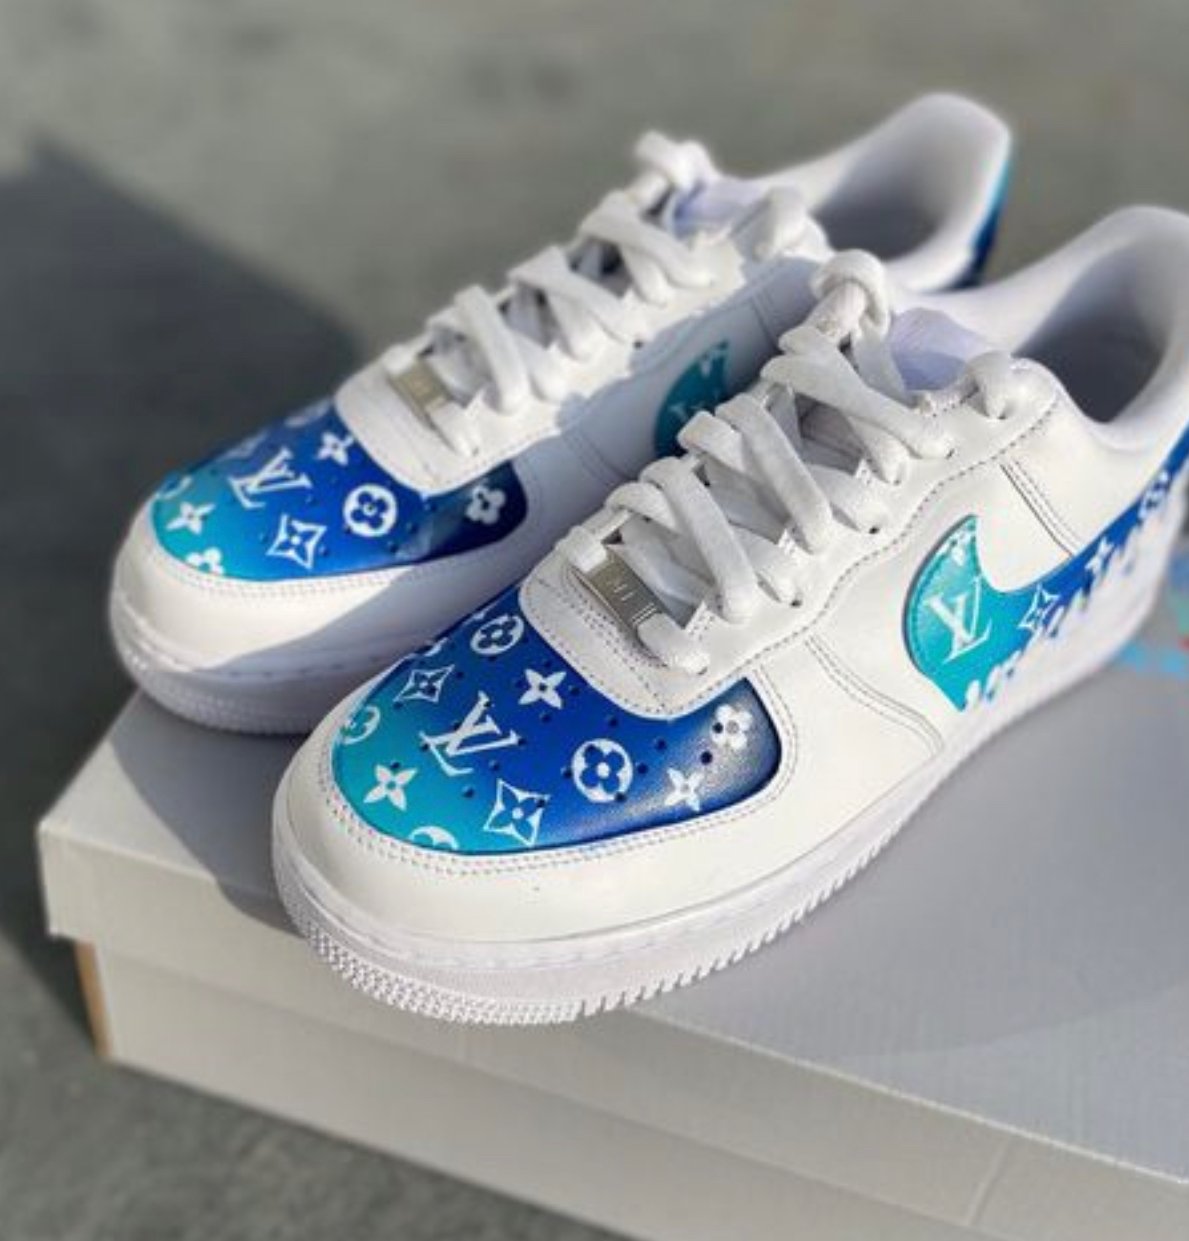 Turquoise lv custom airforces with free crease protectors | Customsbyzeee